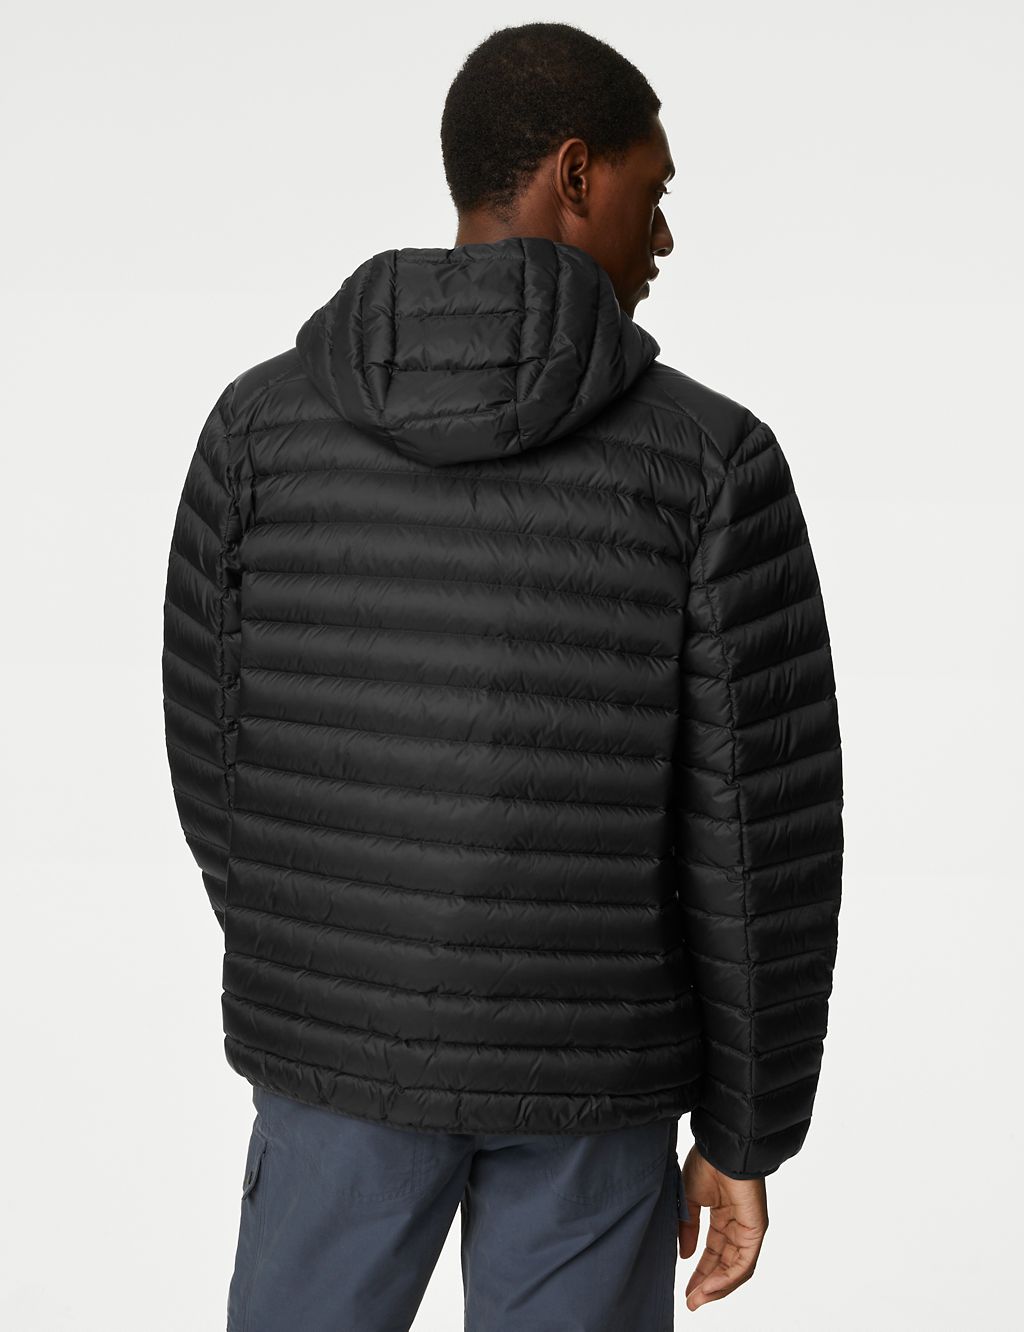 Feather and Down Jacket with Stormwear™ 5 of 6